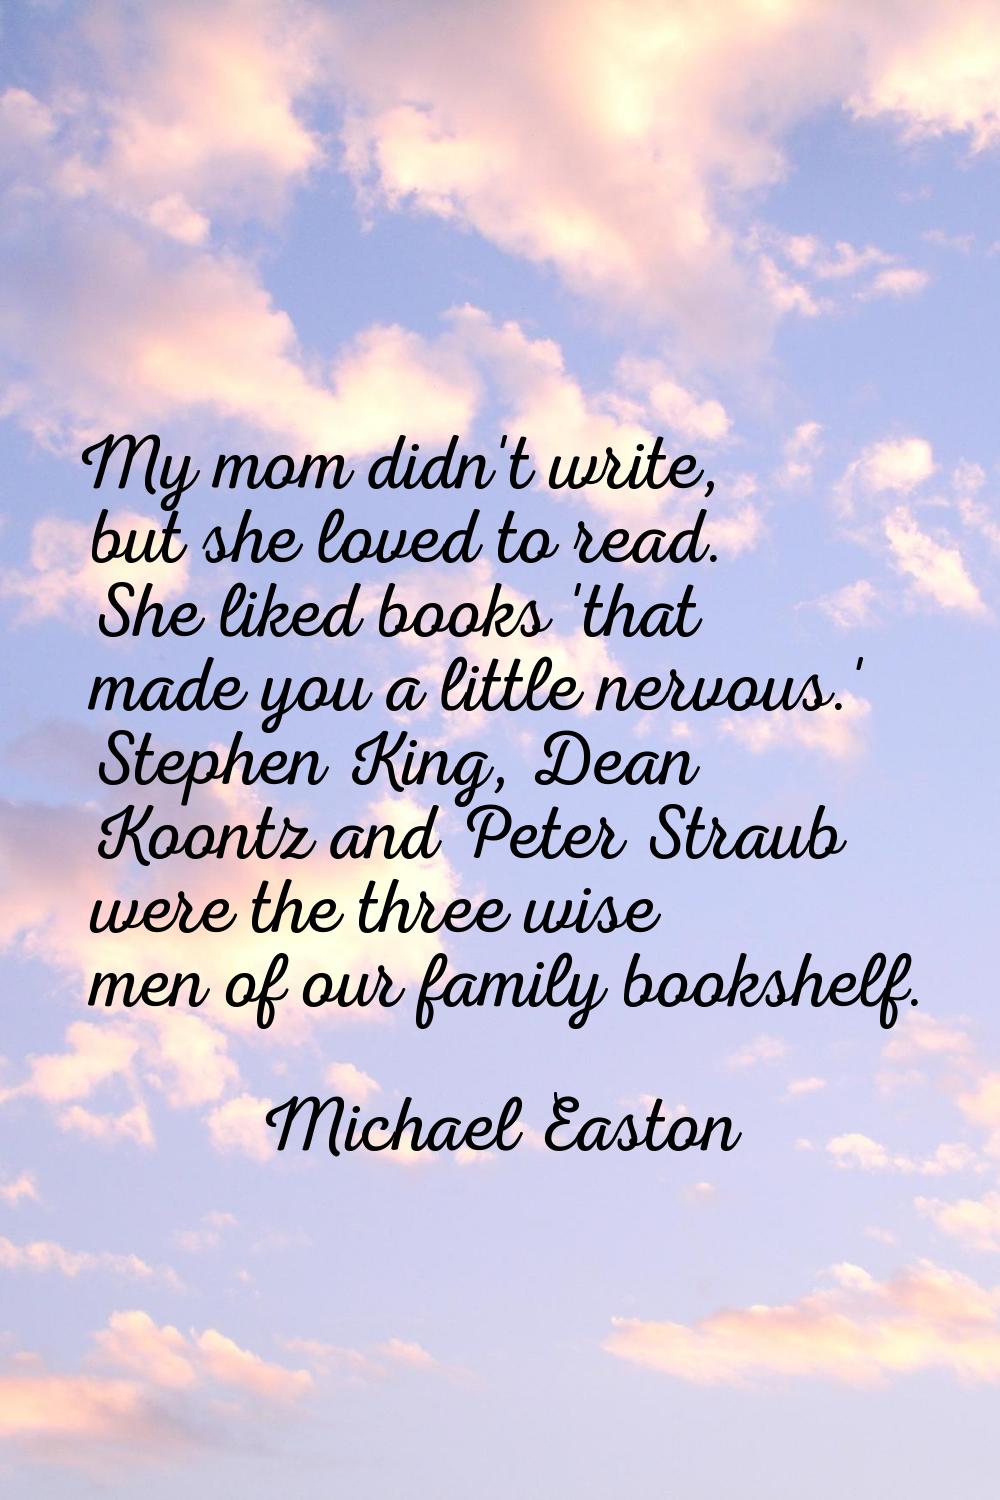 My mom didn't write, but she loved to read. She liked books 'that made you a little nervous.' Steph